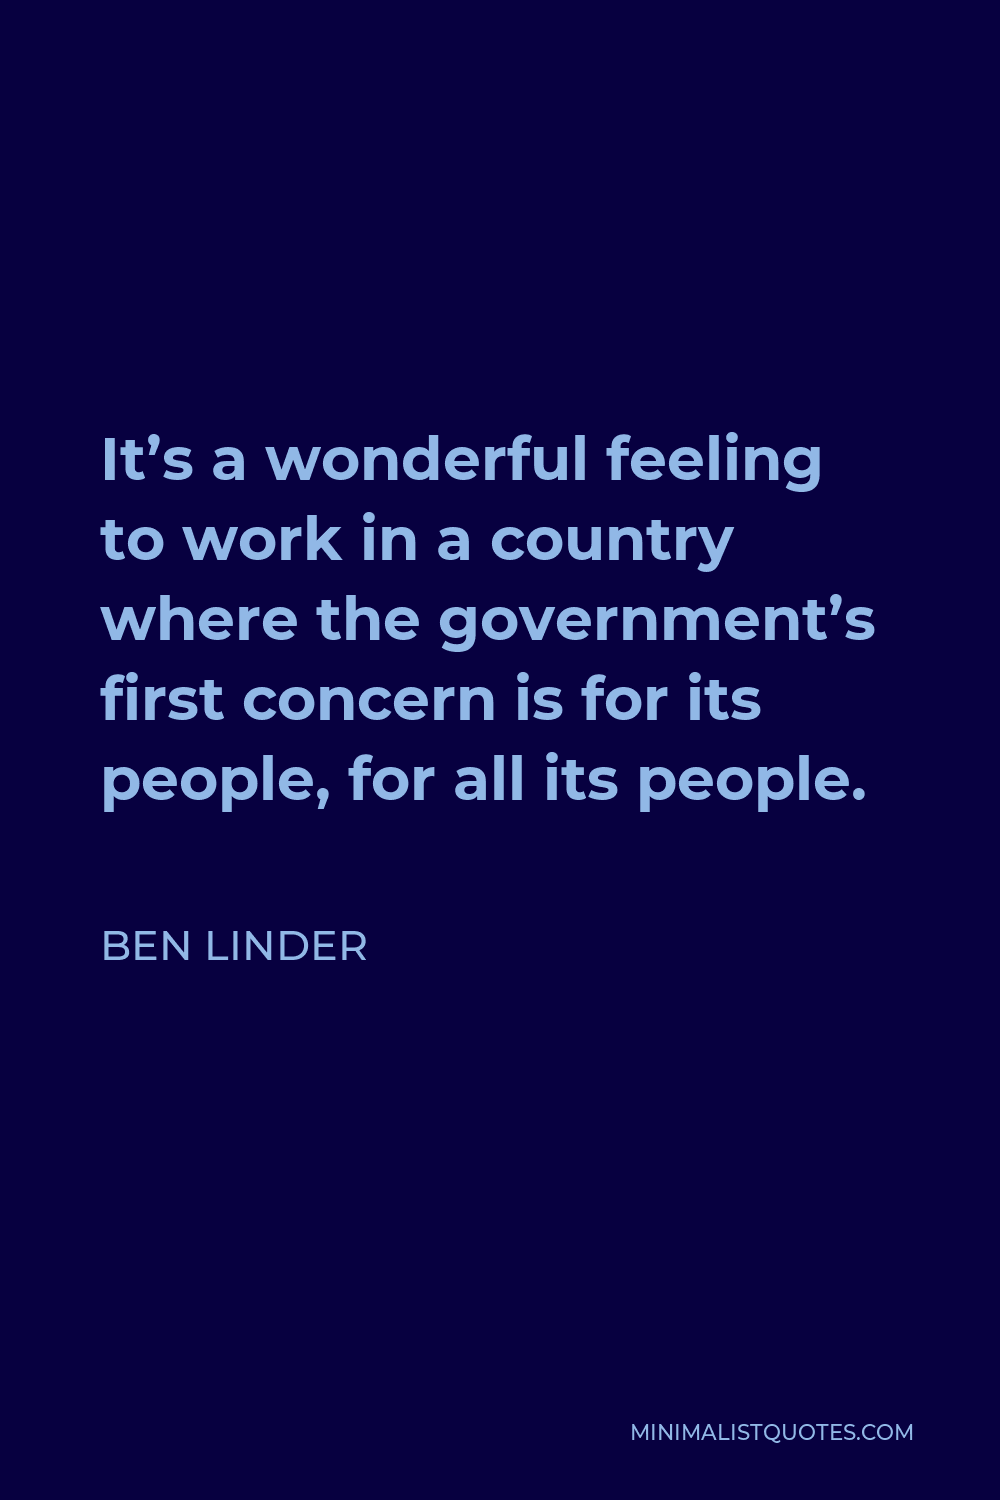 Ben Linder Quote - It’s a wonderful feeling to work in a country where the government’s first concern is for its people, for all its people.